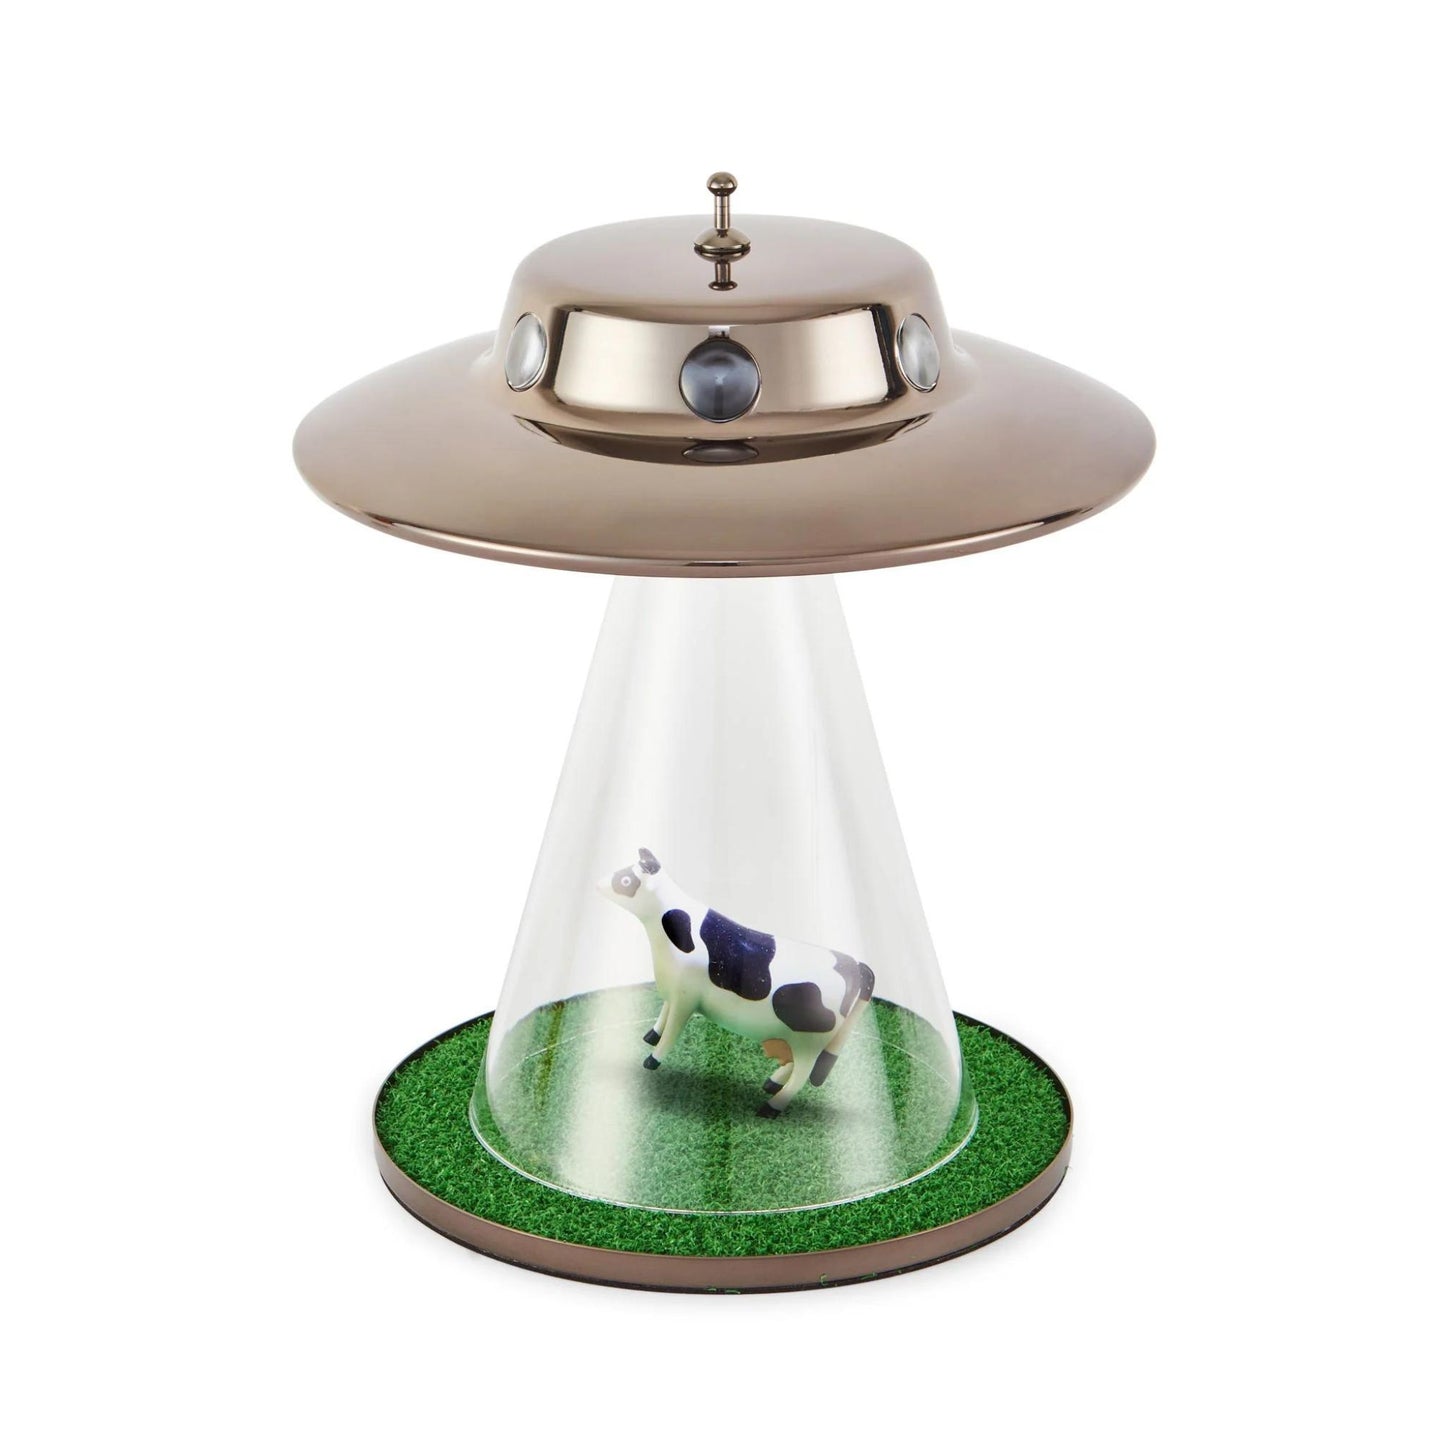 transparent background - Original UFO Cow Lamp & amazon alien abduction table desk lamp with grass, cow and flying UFO saucer LED RGB night light